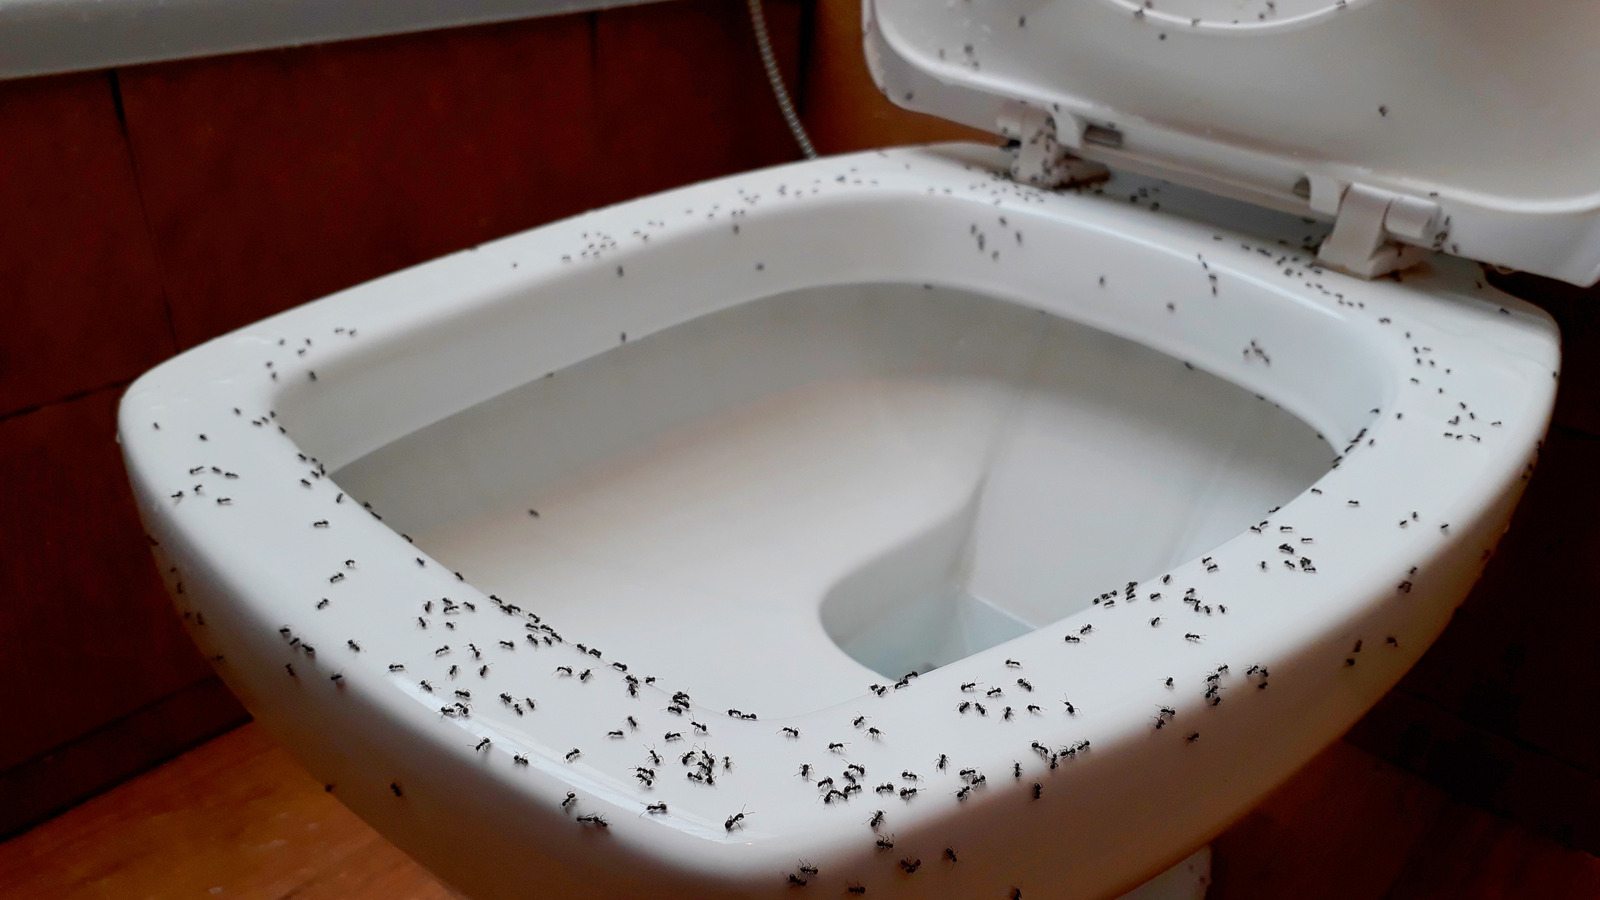 Why Is There Ants In My Toilet Bowl